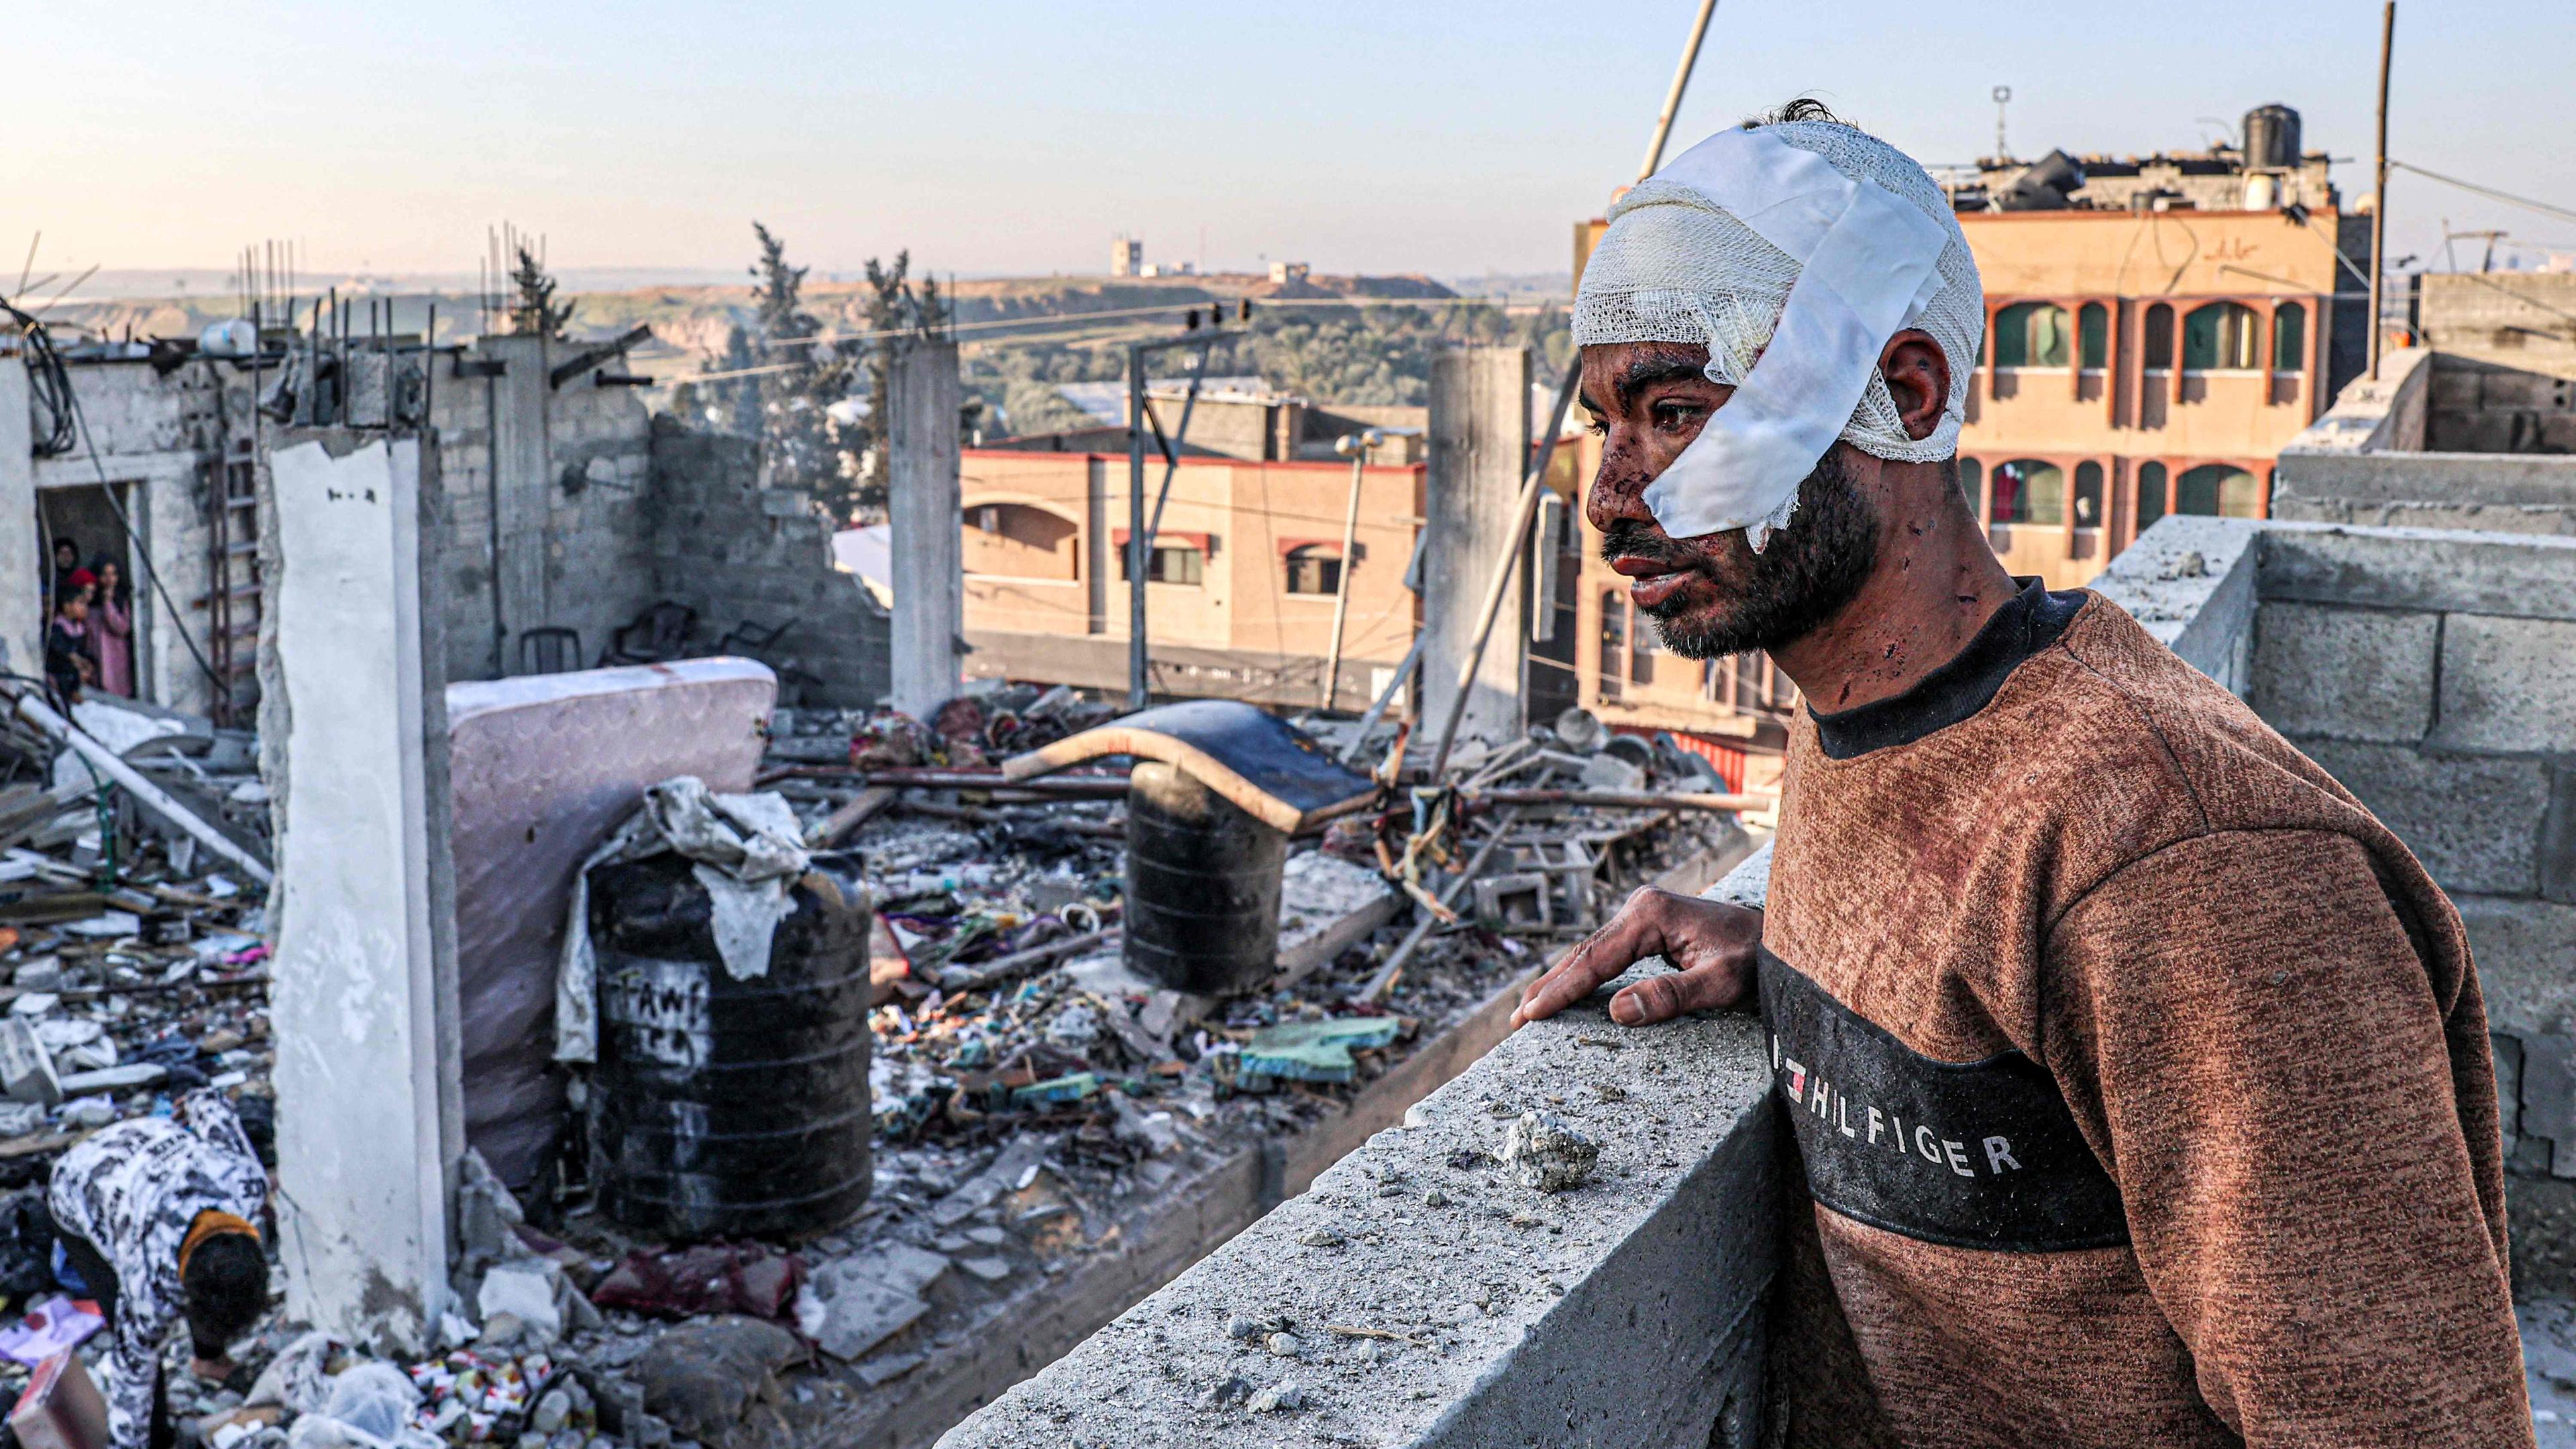 TOPSHOT - An injured man with a bandaged head looks on while standing next to the rubble and debris of a destroyed building in the aftermath of Israeli bombardment on Rafah in the southern Gaza Strip on February 7, 2024, amid the ongoing conflict between Israel and the Palestinian militant group Hamas. (Photo by SAID KHATIB / AFP)